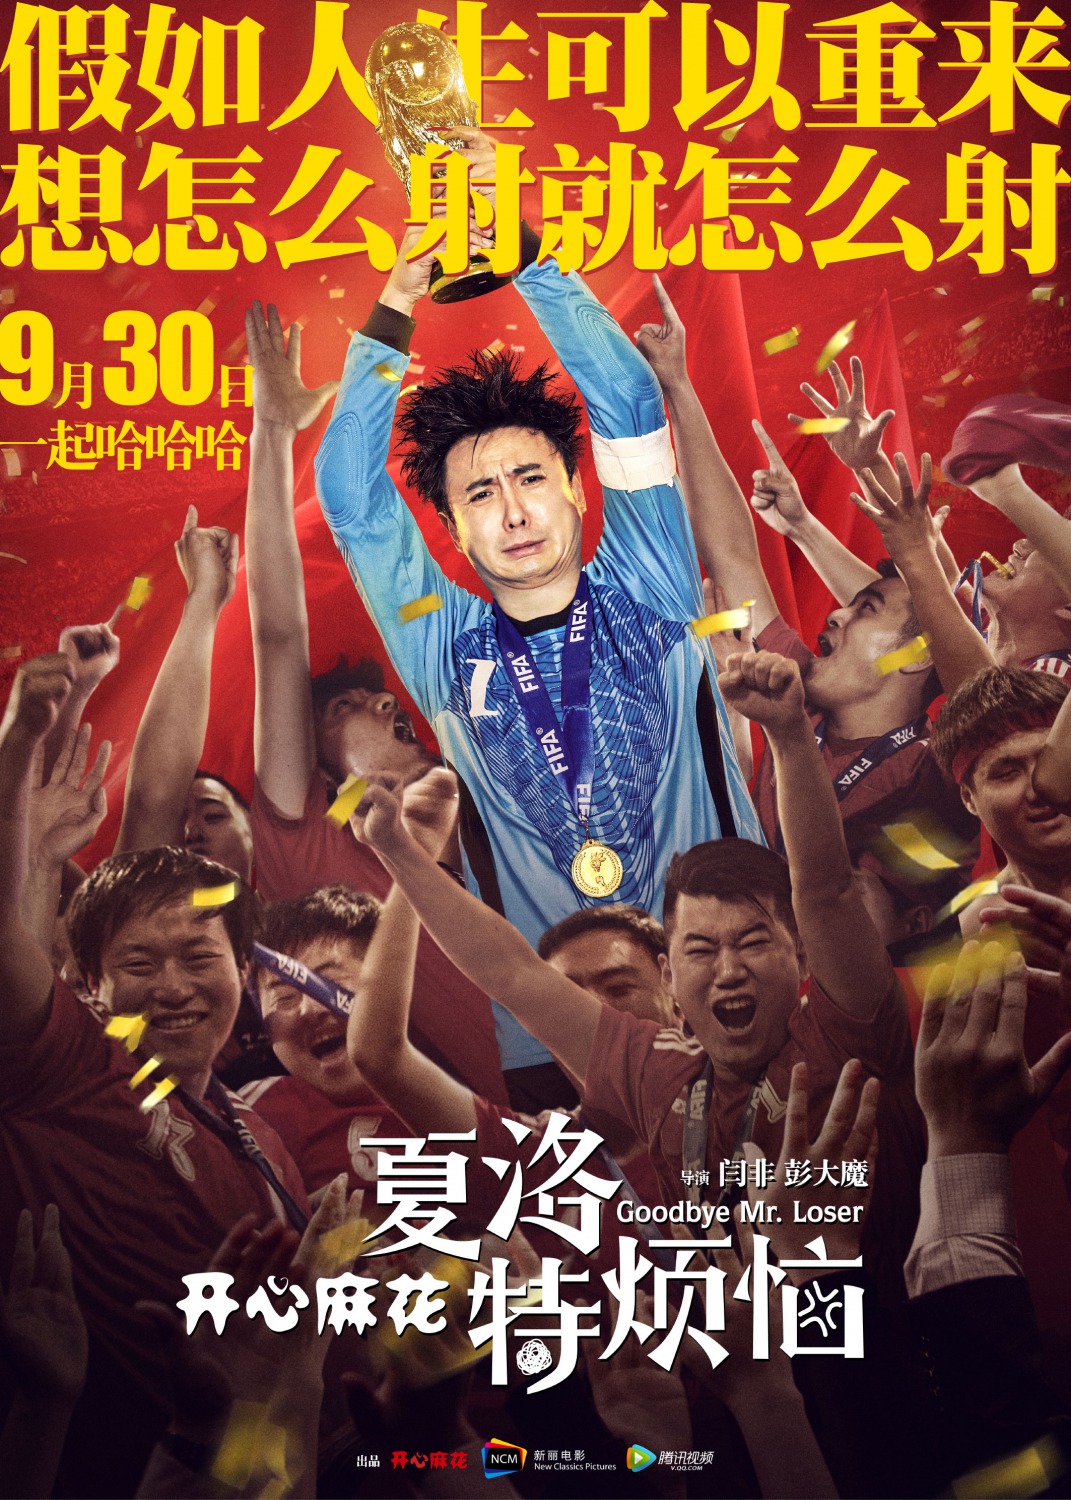 Extra Large Movie Poster Image for Xia Luo te fan nao (#3 of 4)